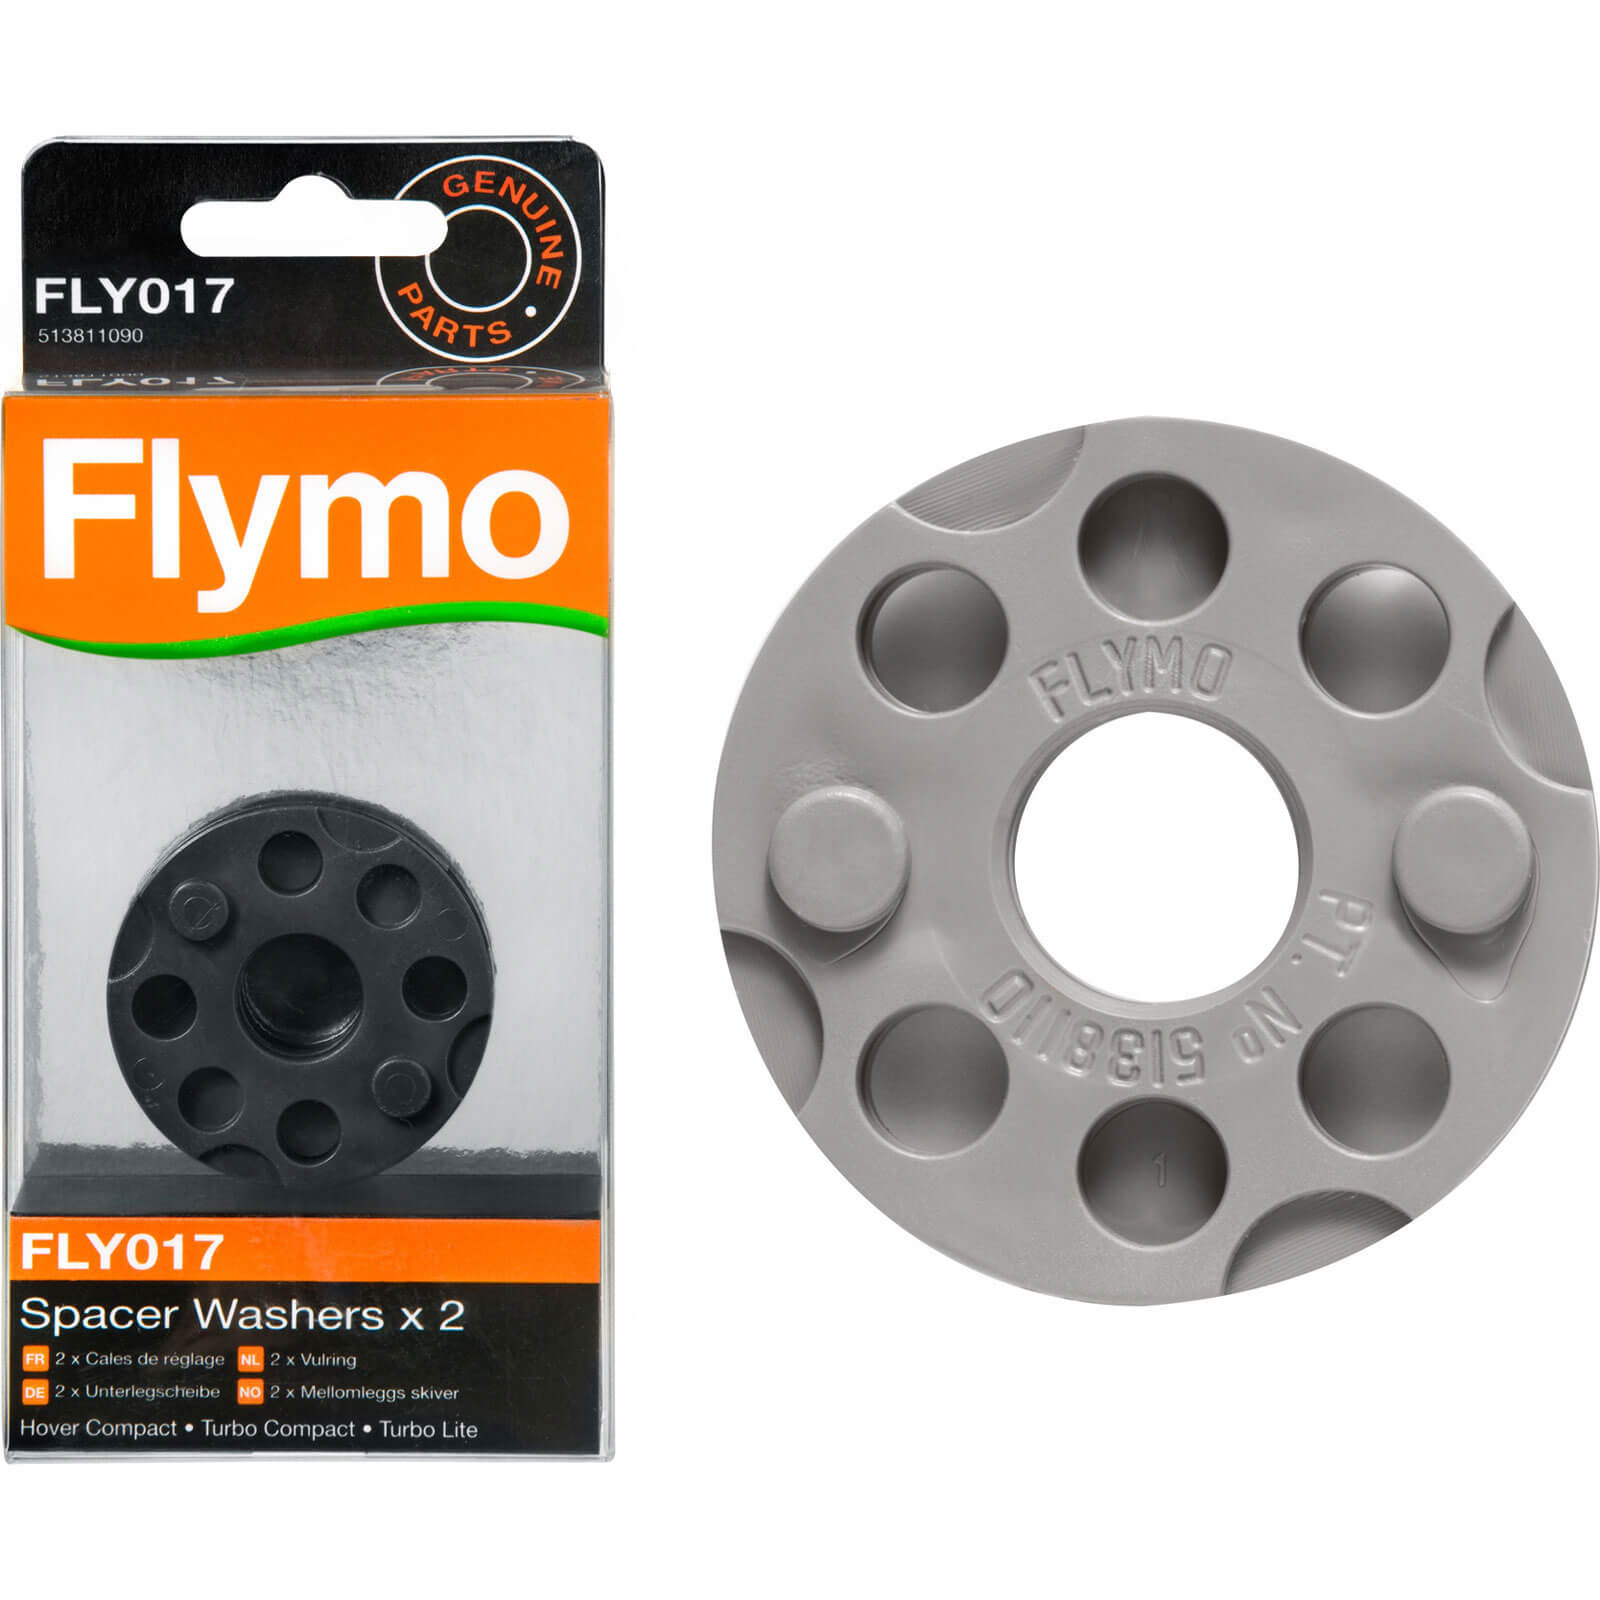 Image of Flymo FLY017 Genuine Spacer Washers for Lawnmowers Pack of 2